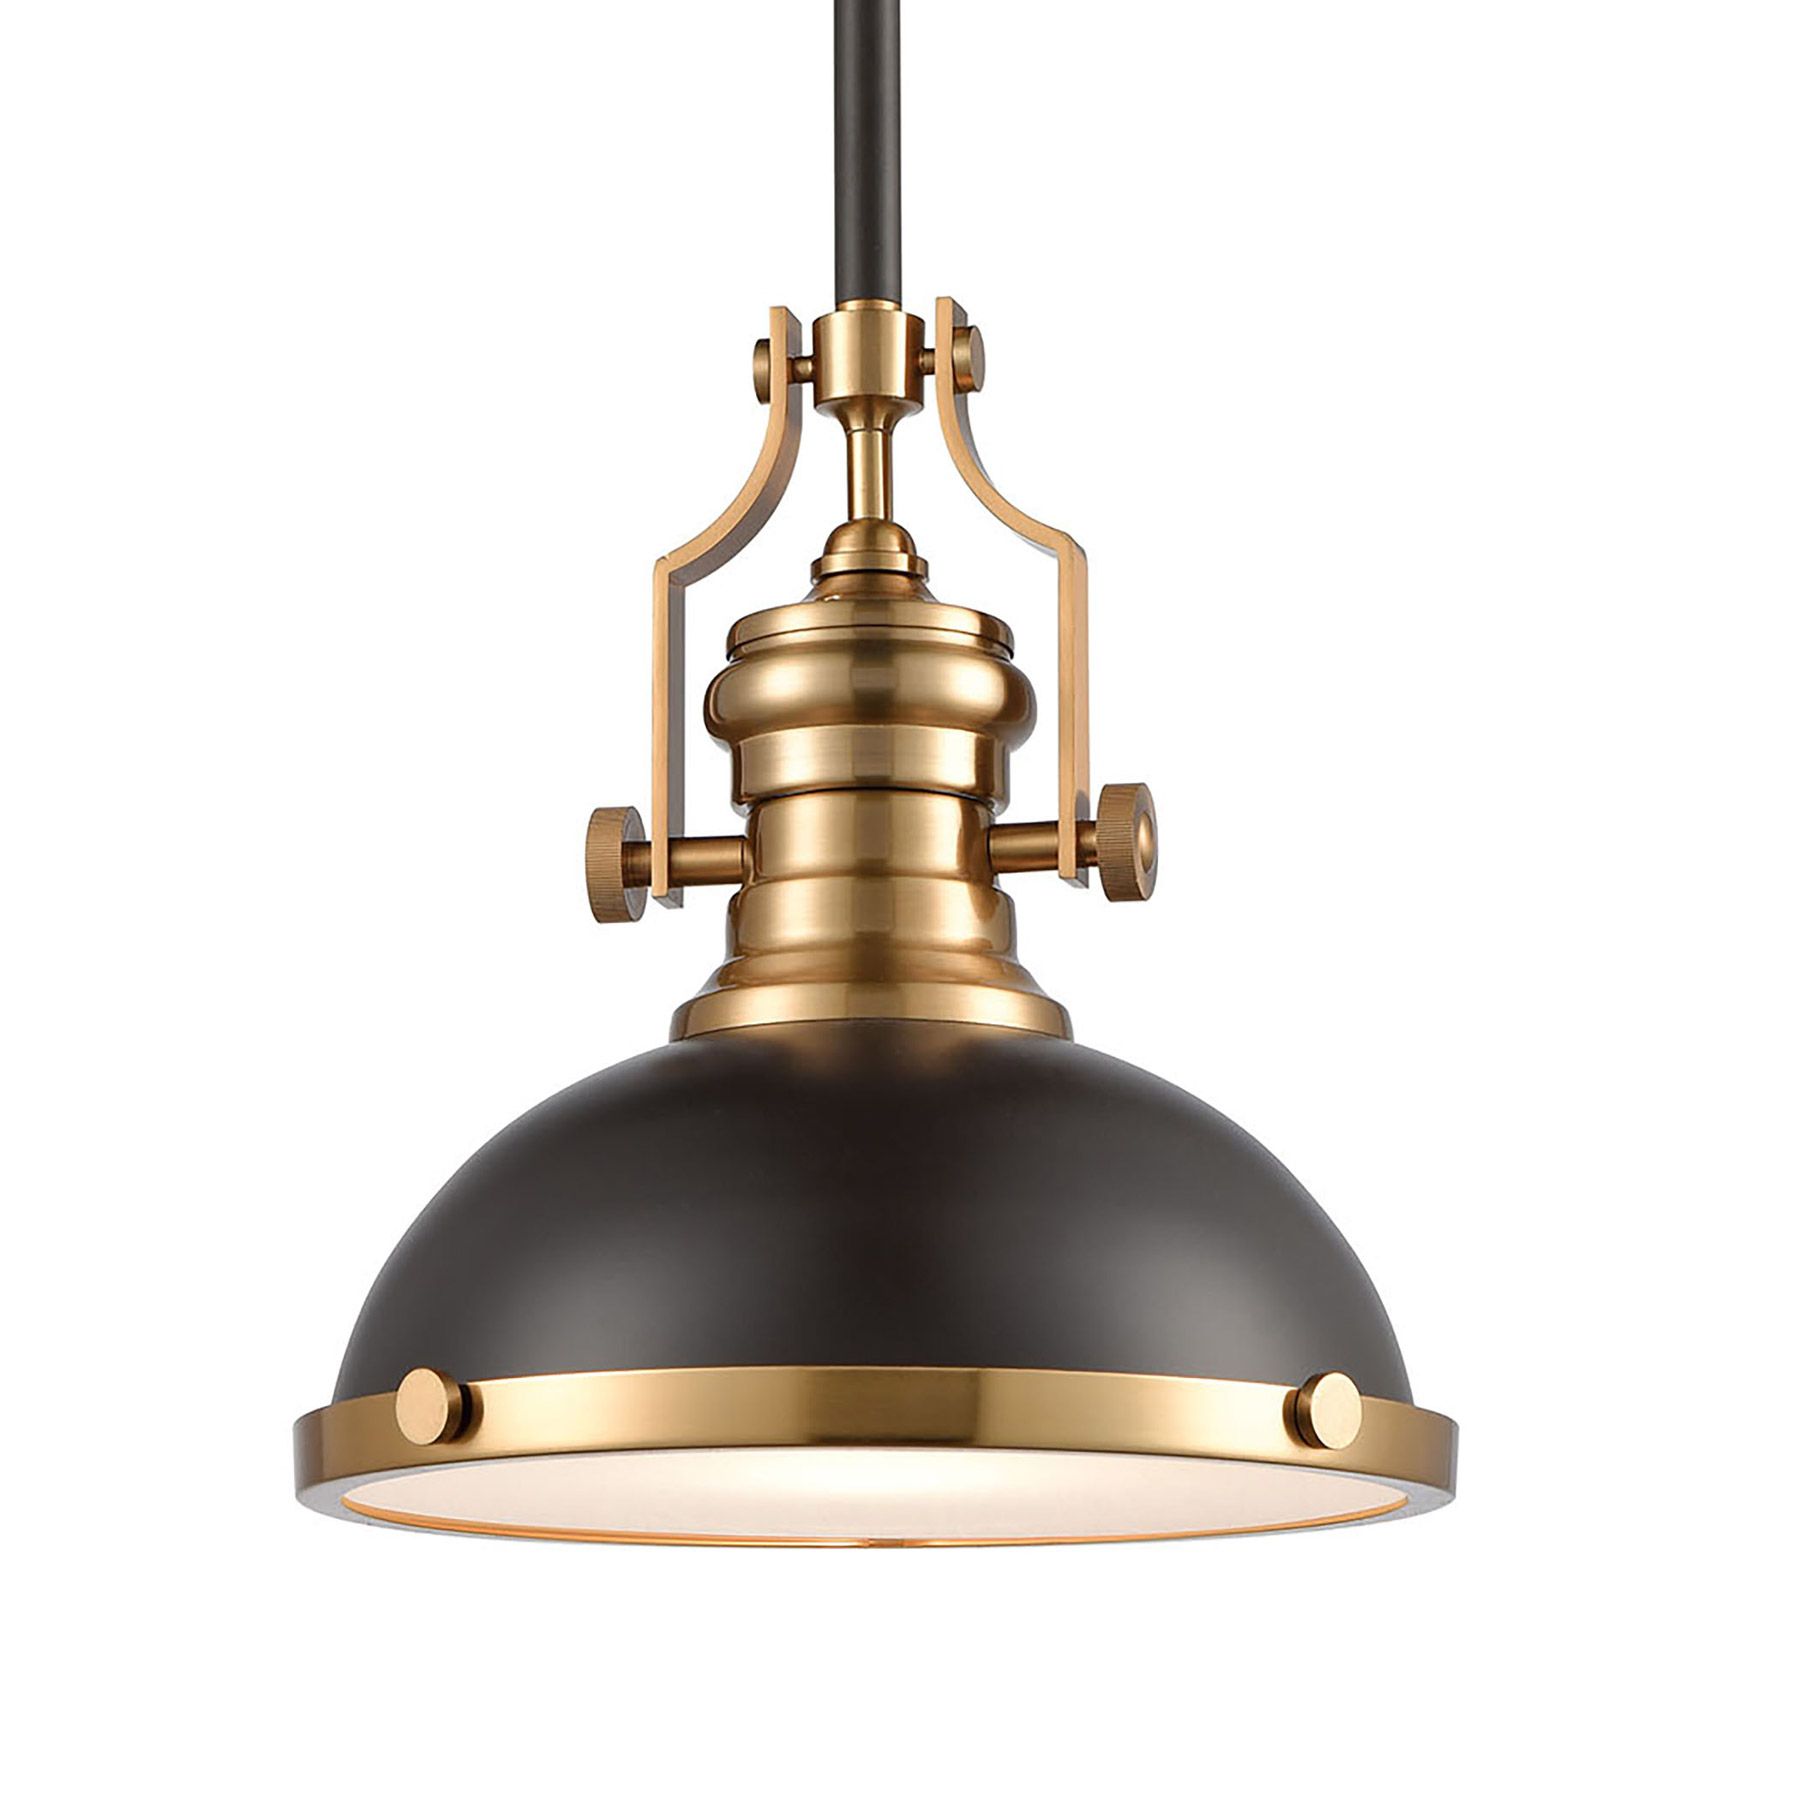 Elk Lighting 66614 1 1 Light Pendant In Oil Rubbed Bronze Pertaining To Textured Glass And Oil Rubbed Bronze Metal Pendant Lights (View 6 of 15)